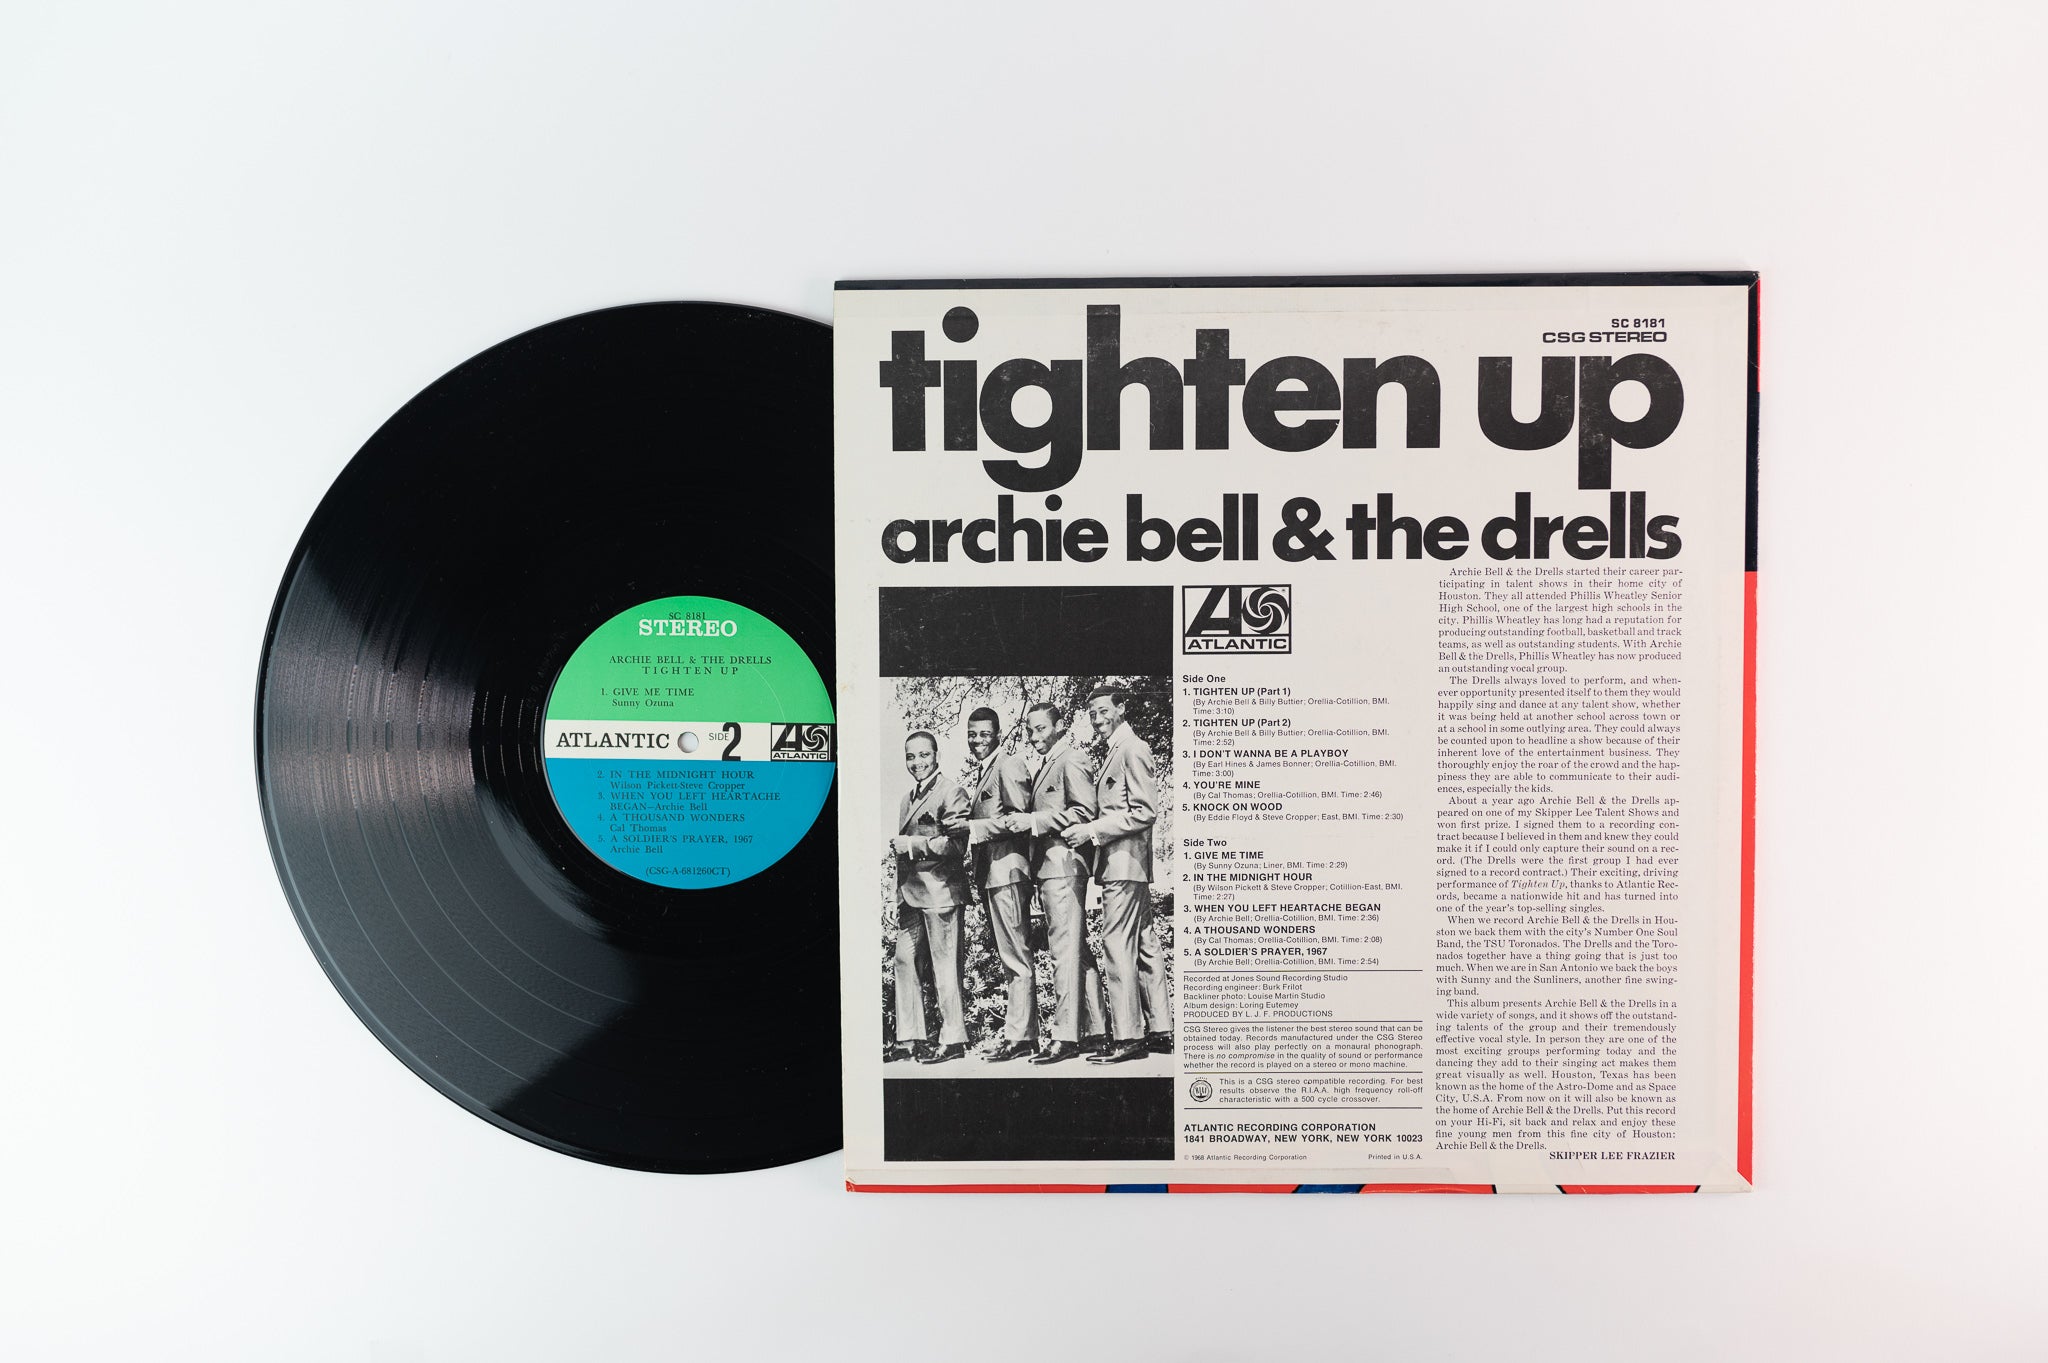 Archie Bell & The Drells - Tighten Up on Atlantic Stereo